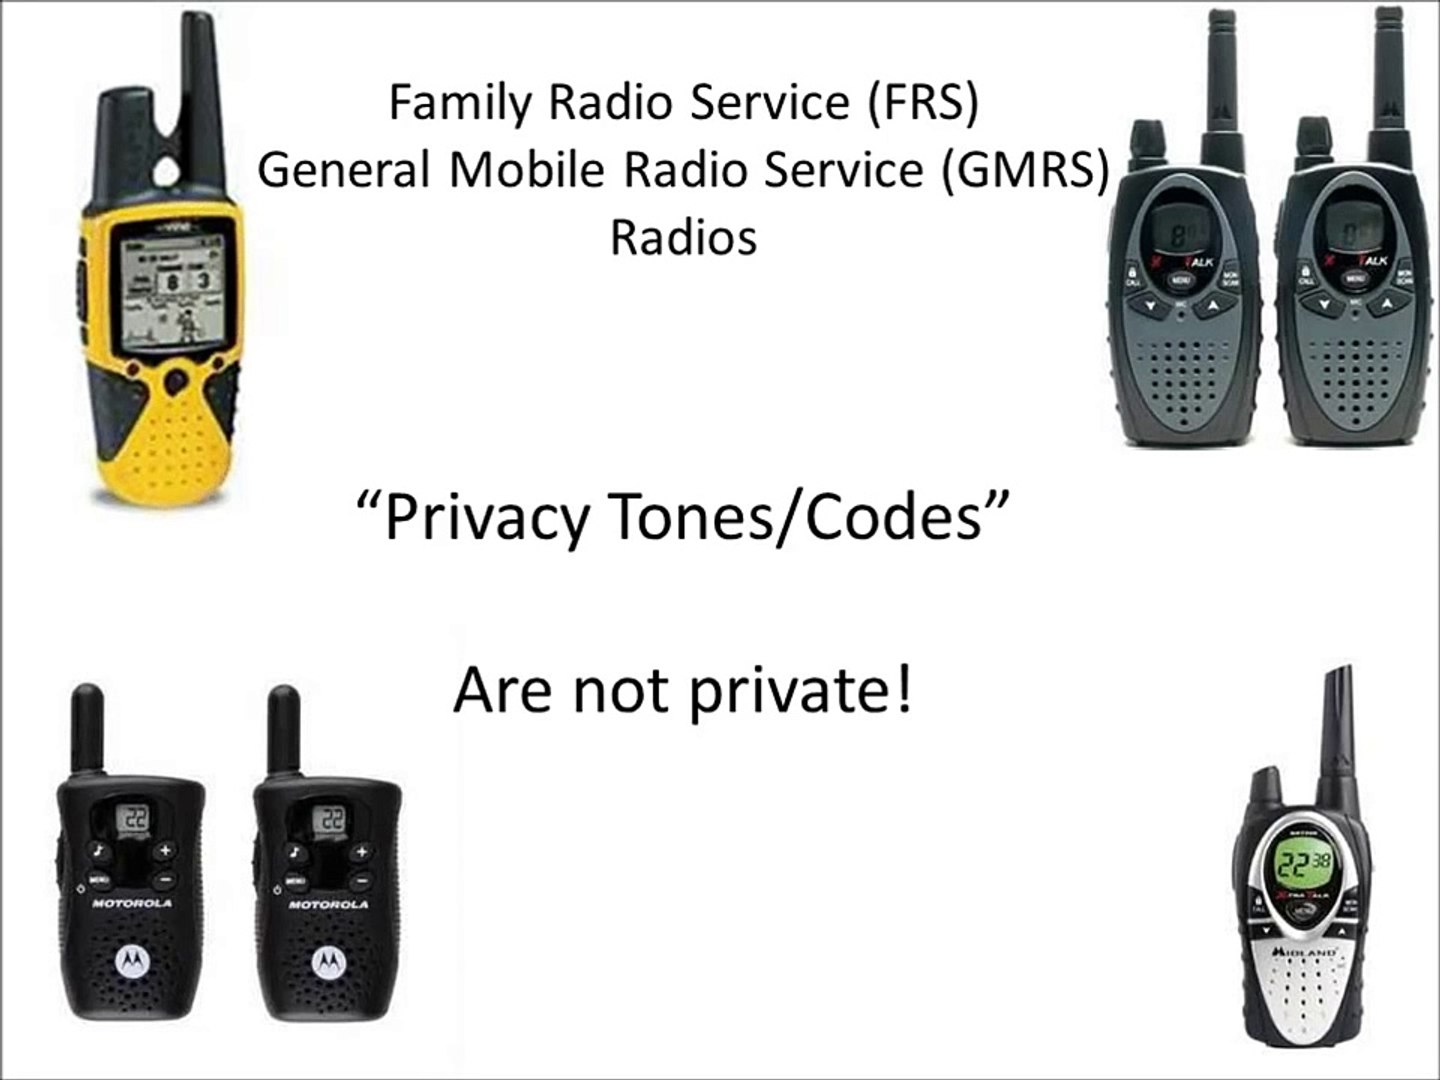 FRS & GMRS Radios - Privacy Tones and Codes are not Private or Secure